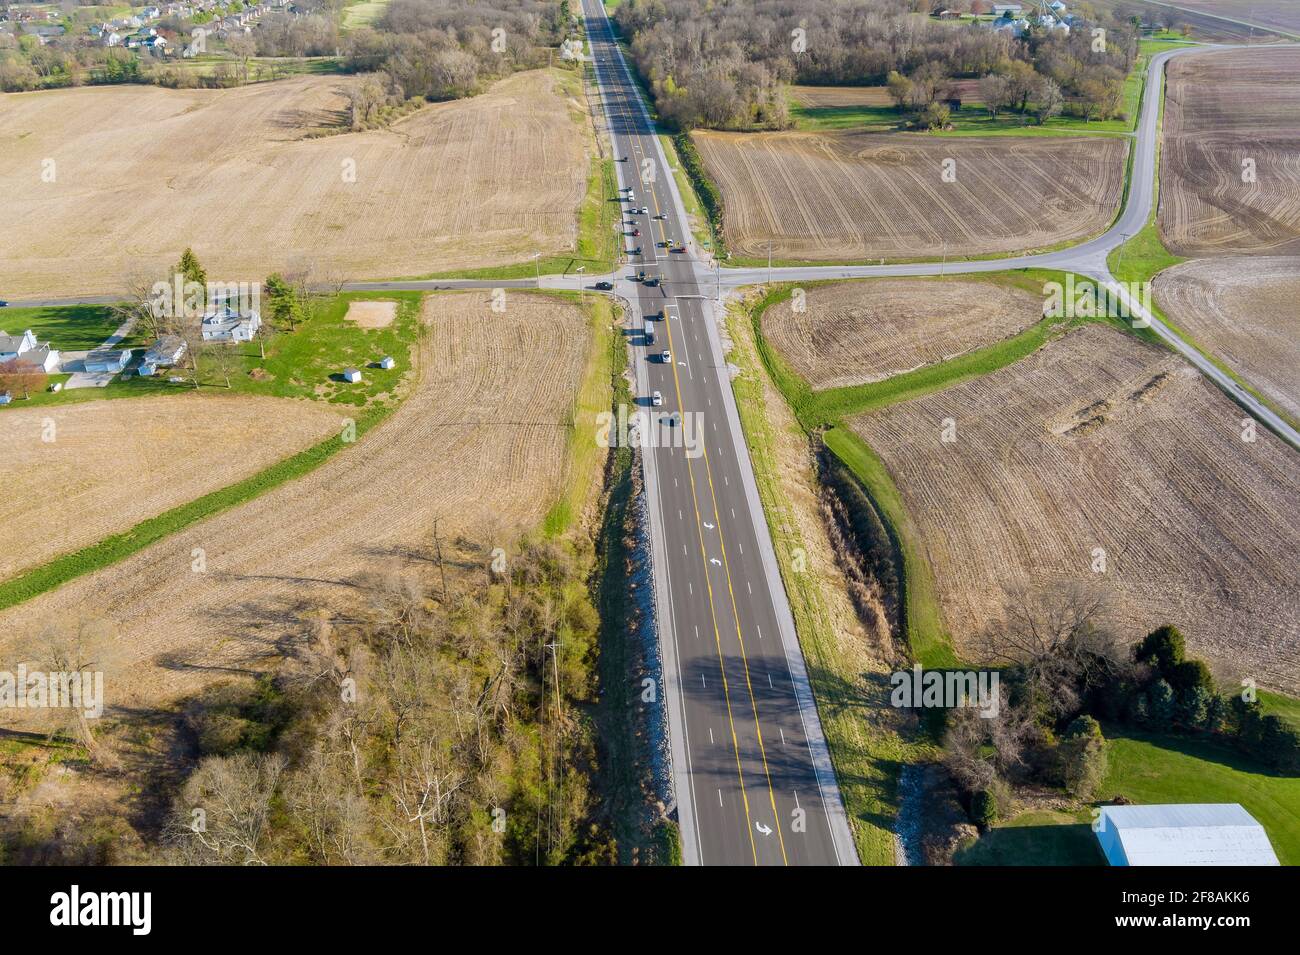 View of an country asphalt road through agricultural fields, in the Caseyville Illinois on USA Stock Photo